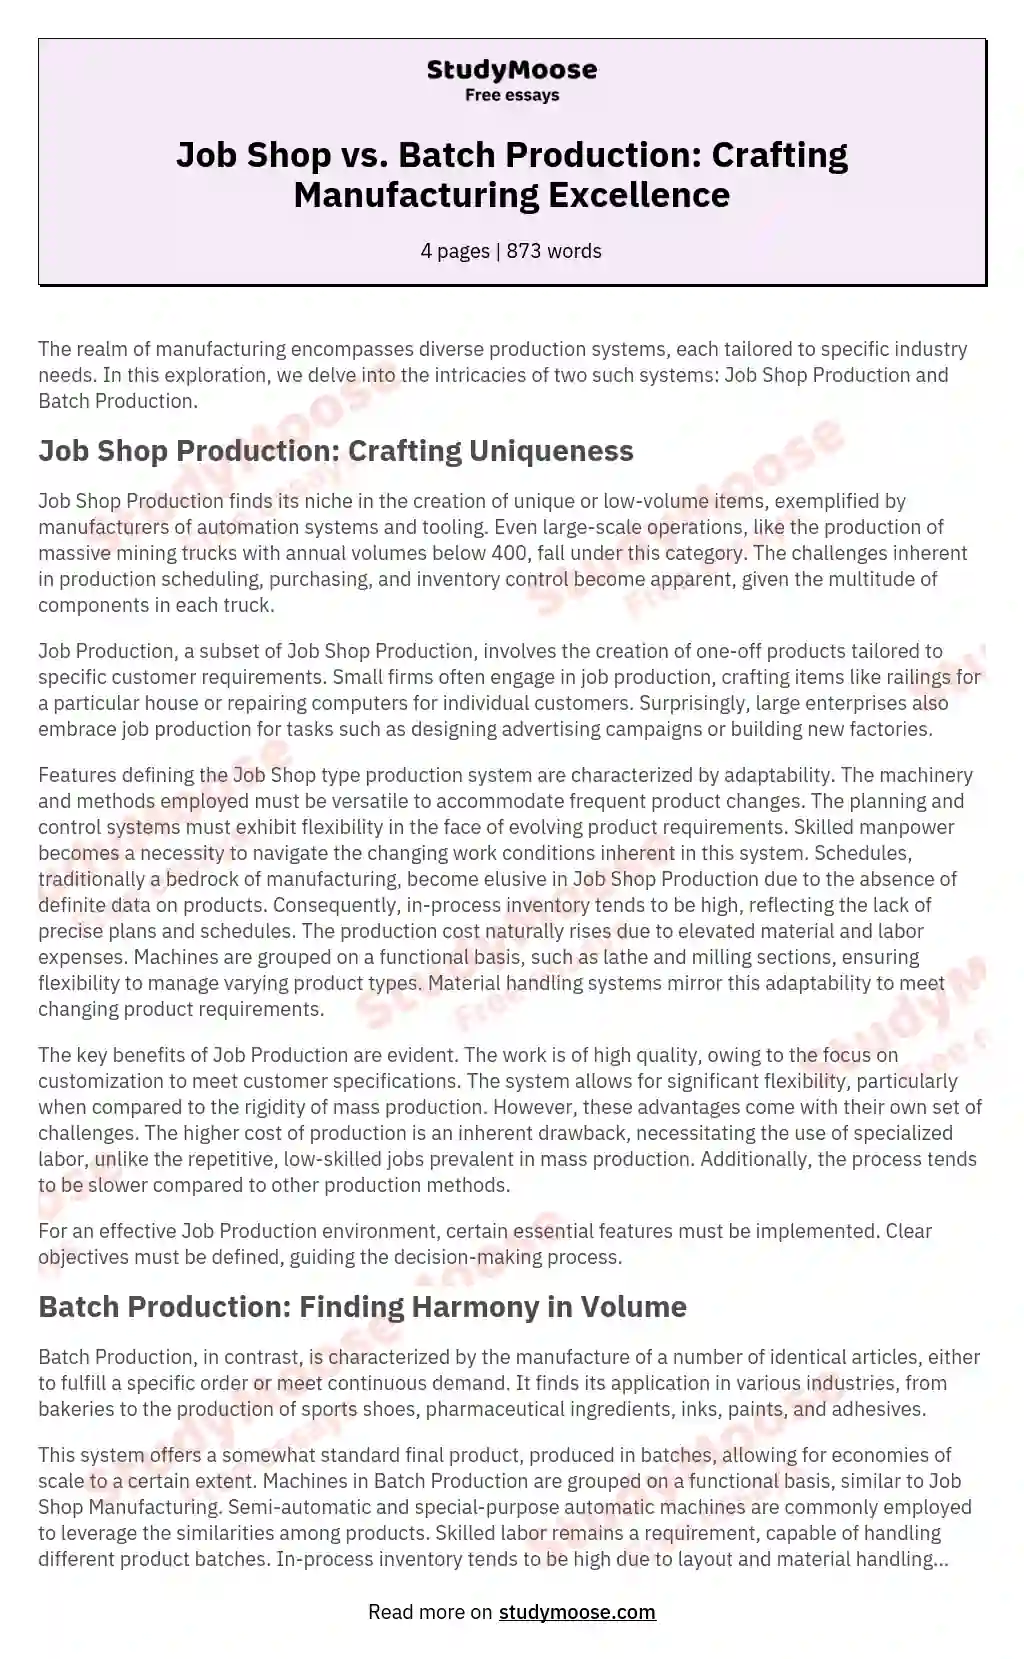 Job Shop vs. Batch Production: Crafting Manufacturing Excellence essay